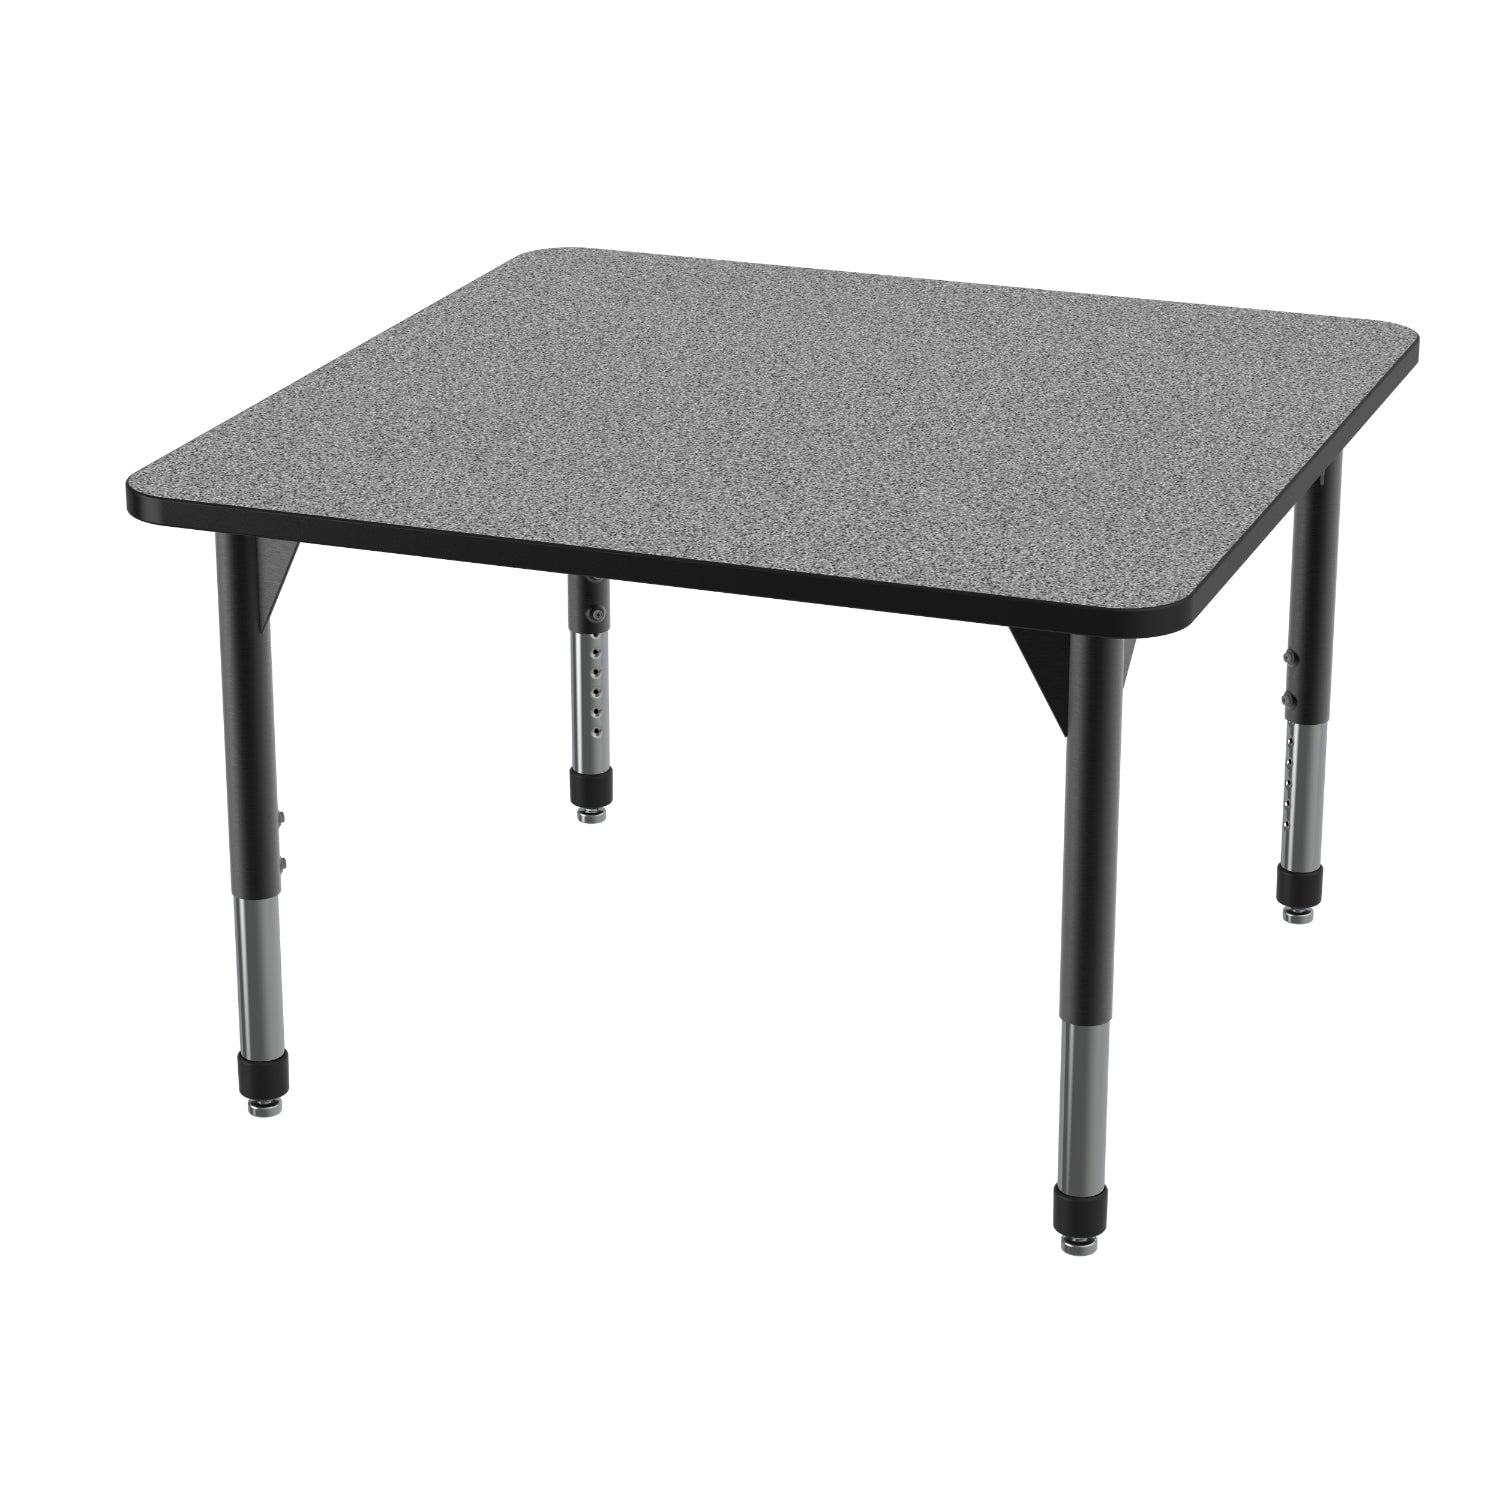 Premier Standing Height Collaborative Classroom Table, 42" Square